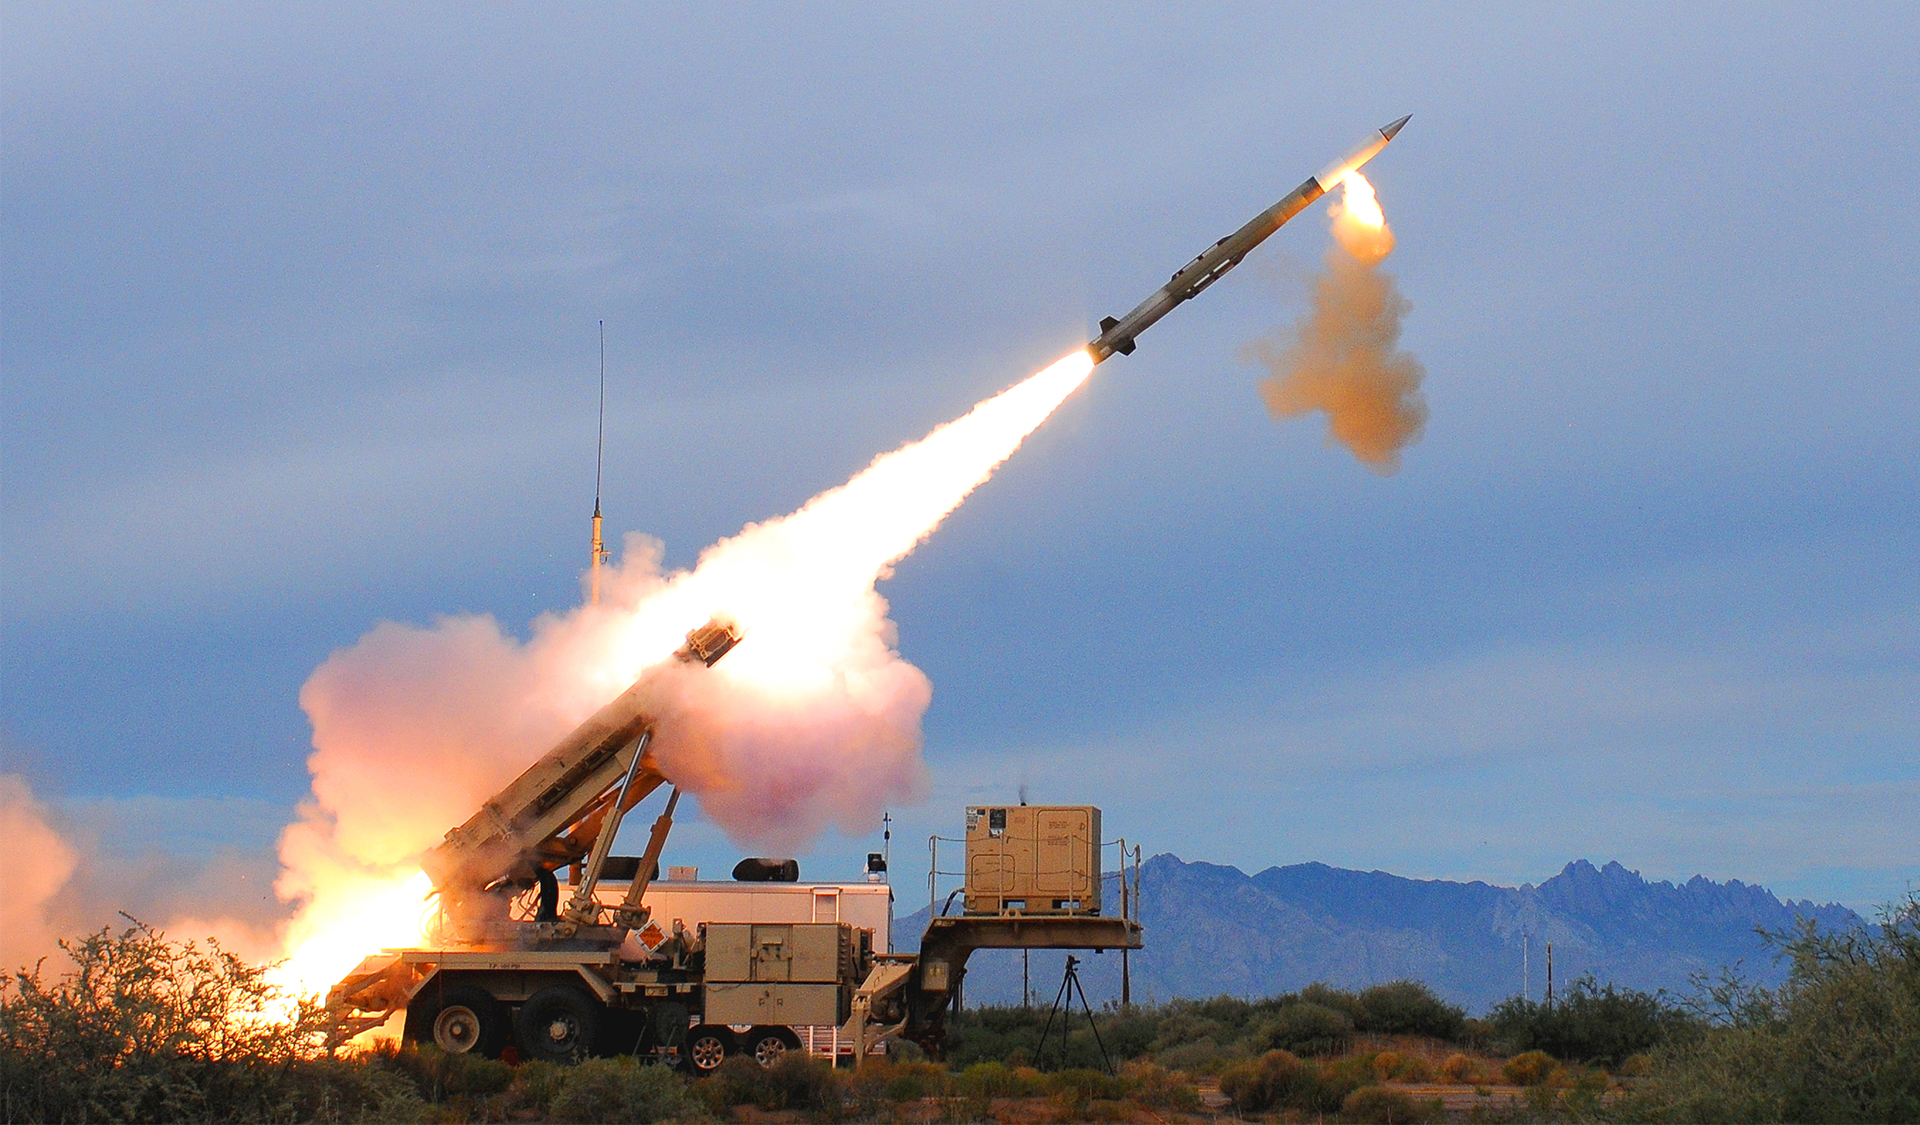 Lockheed Martin tests Patriot PAC-3 MSE interceptor with new software for the first time - it successfully destroys a medium-range ballistic missile